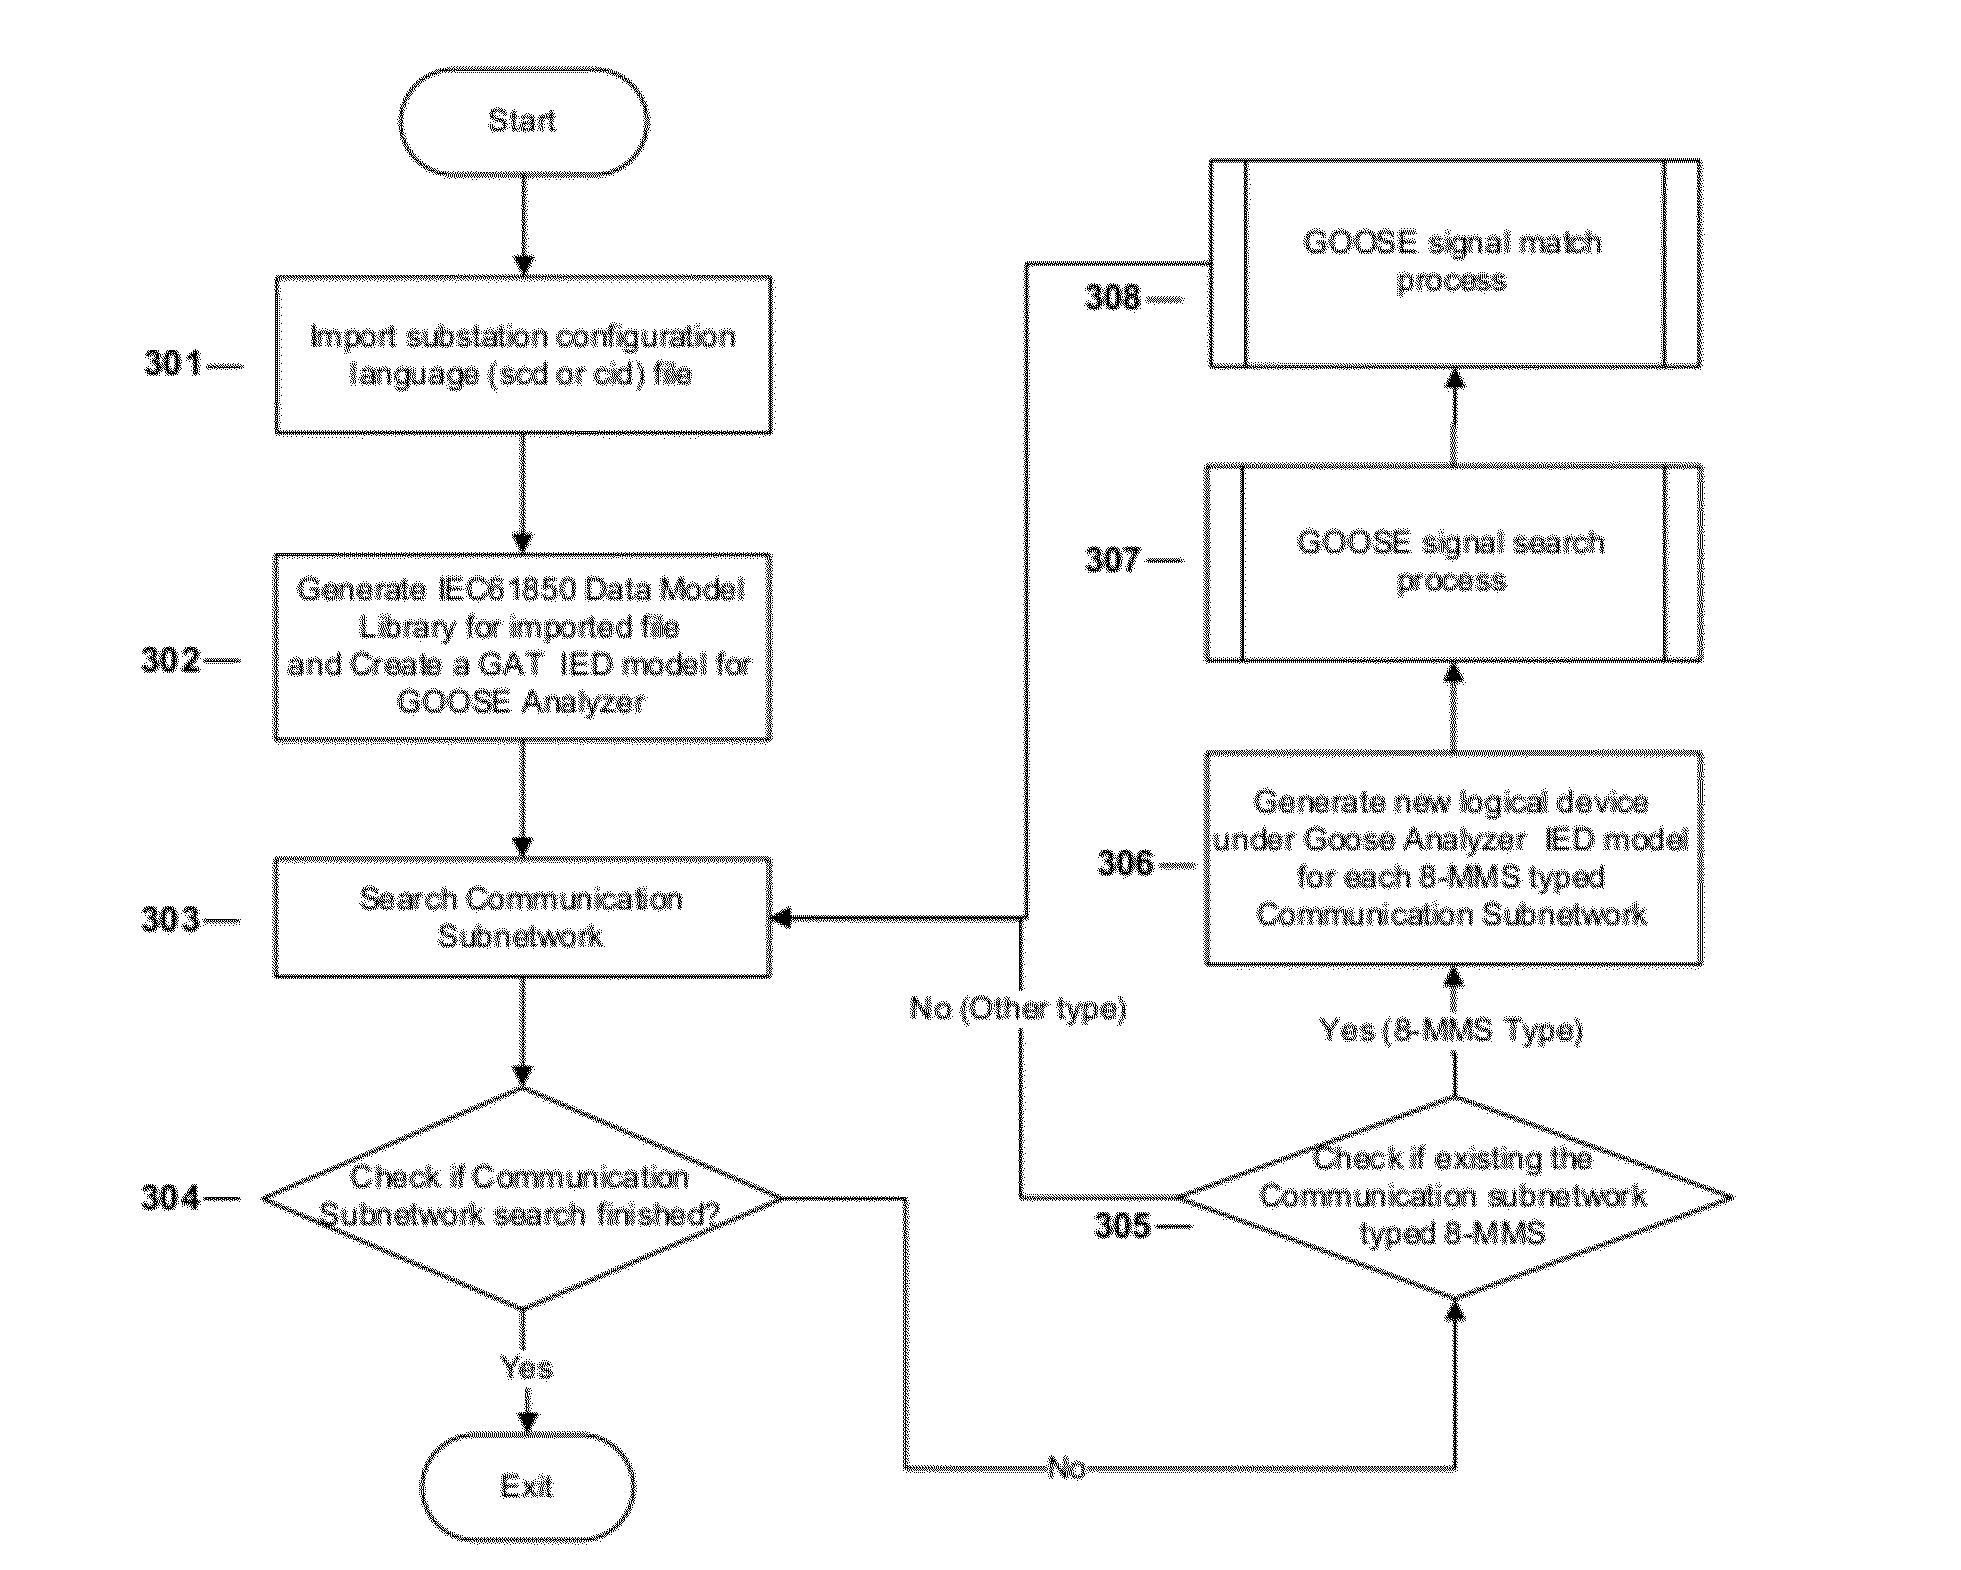 Method and Device for Auto-Generating Goose Signal Connection Topology from Substation Level